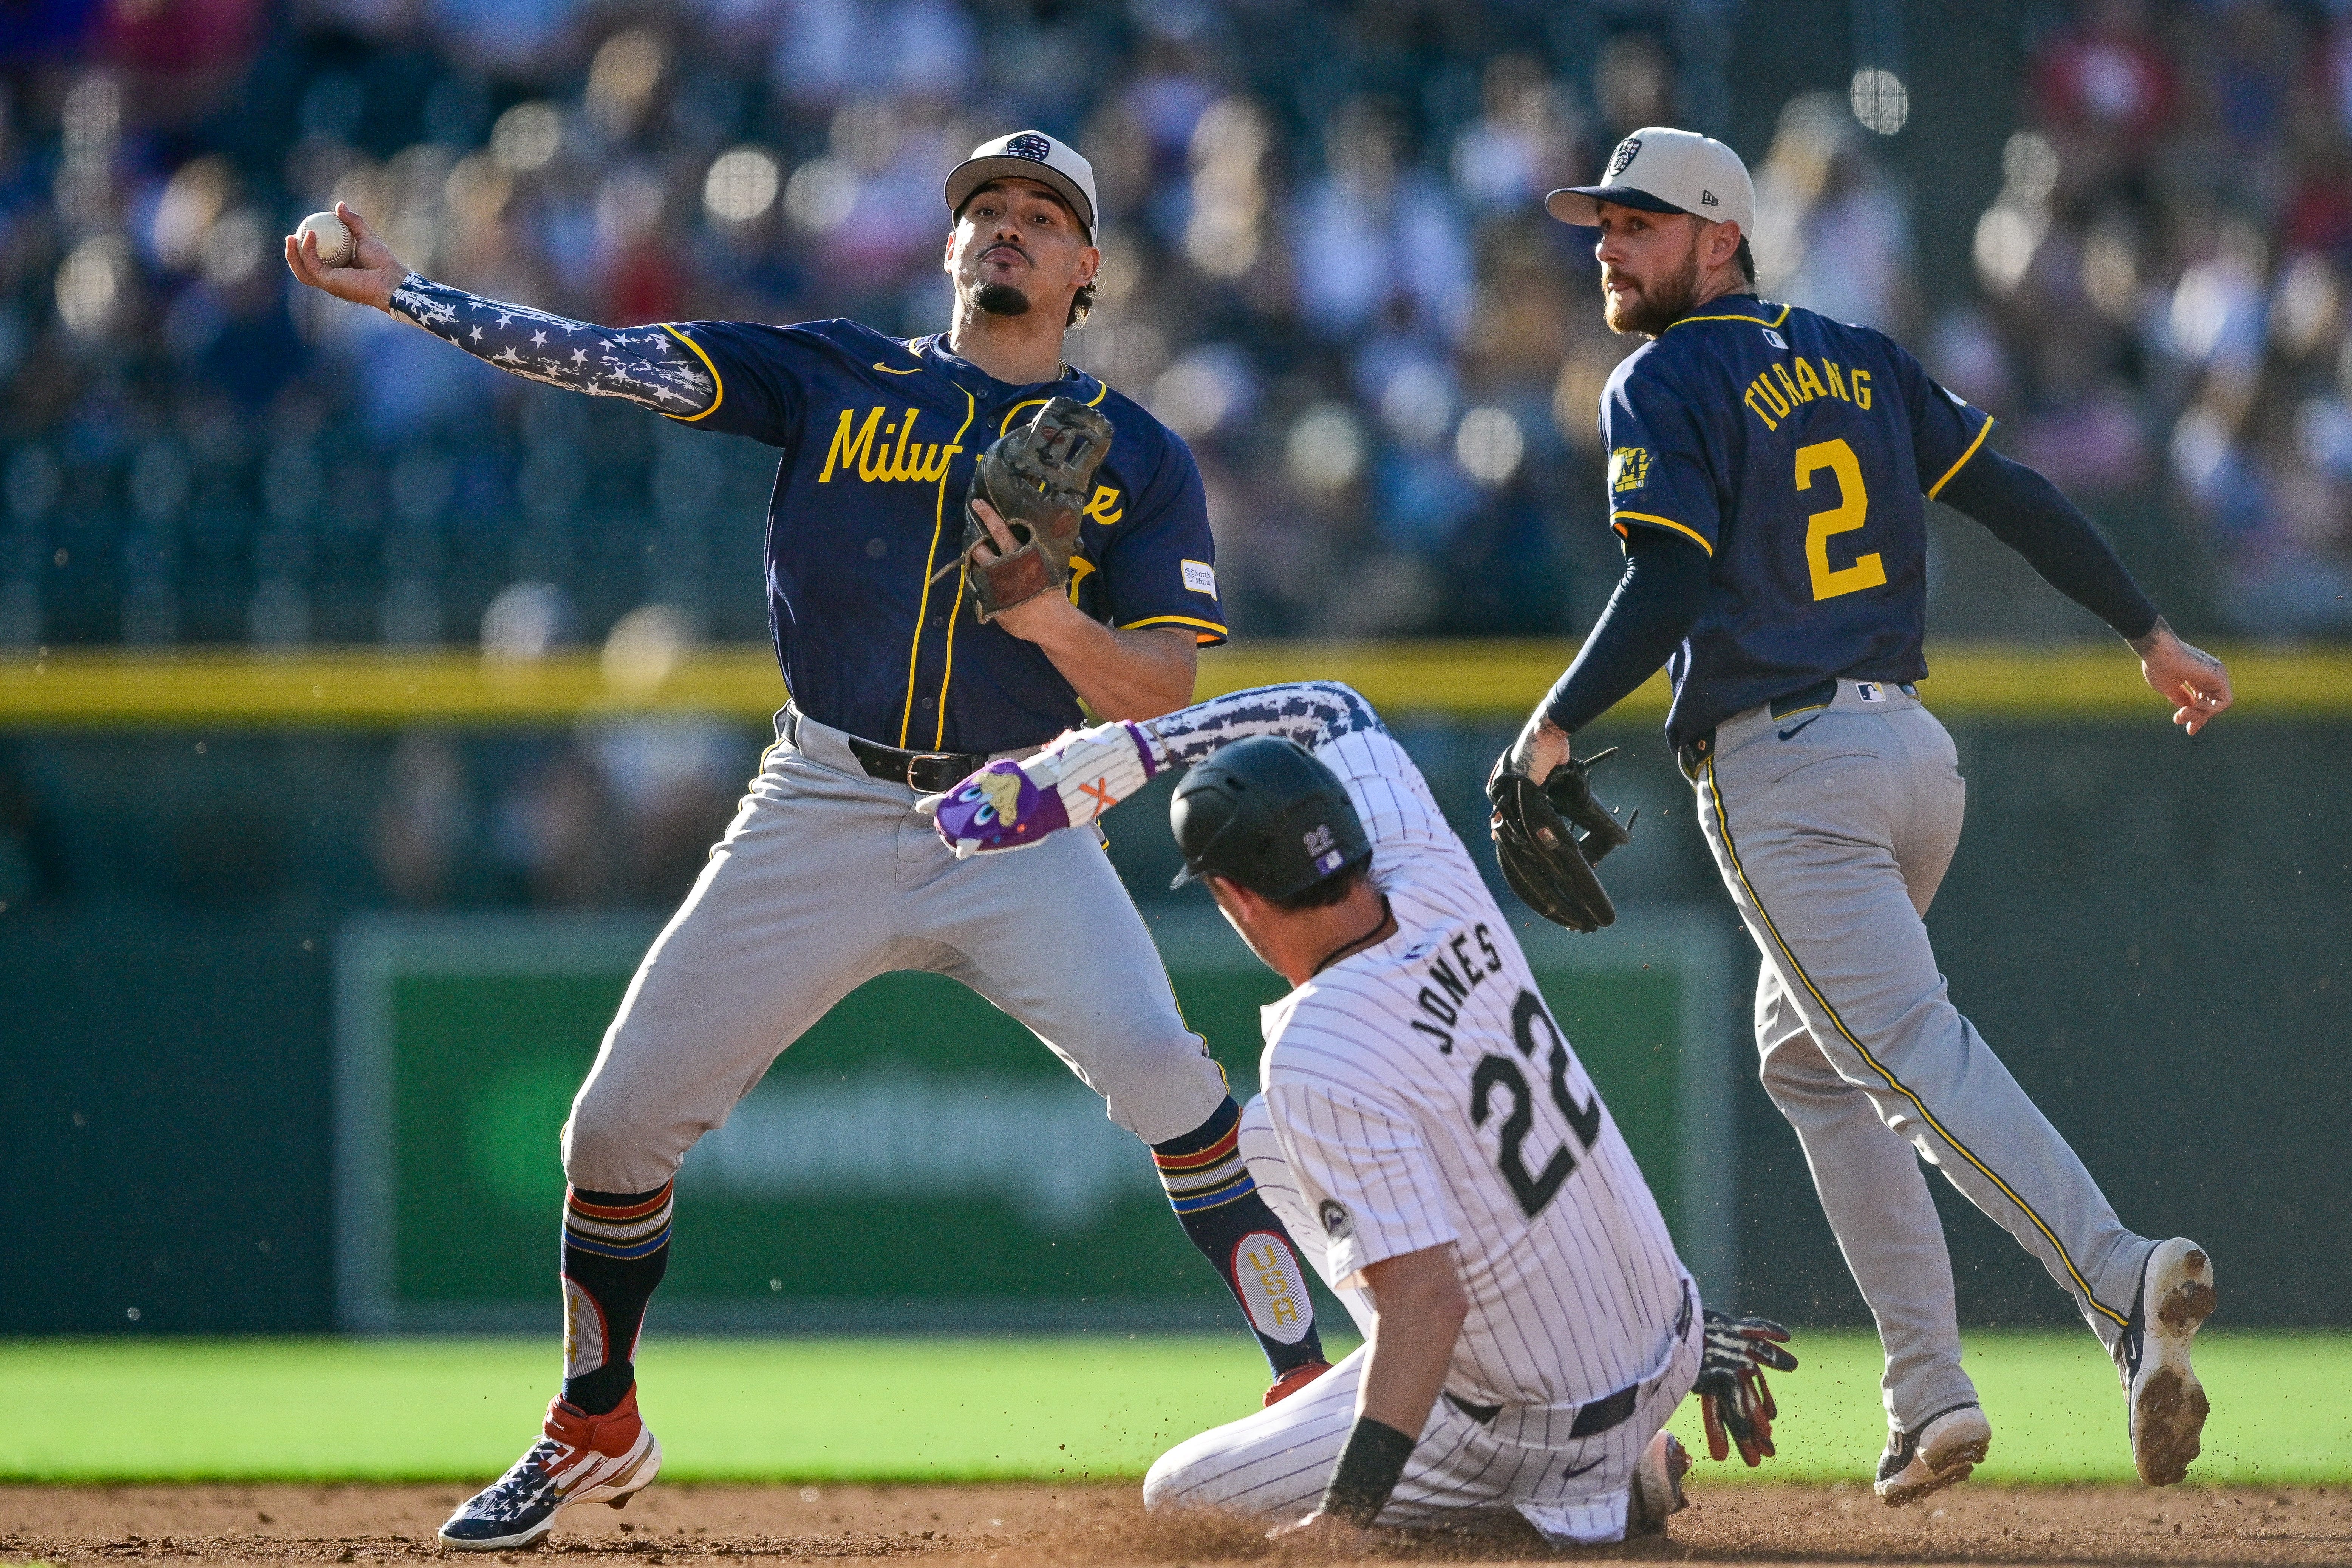 Rockies 4, Brewers 3: Ultimately not enough offense at Coors Field for Milwaukee